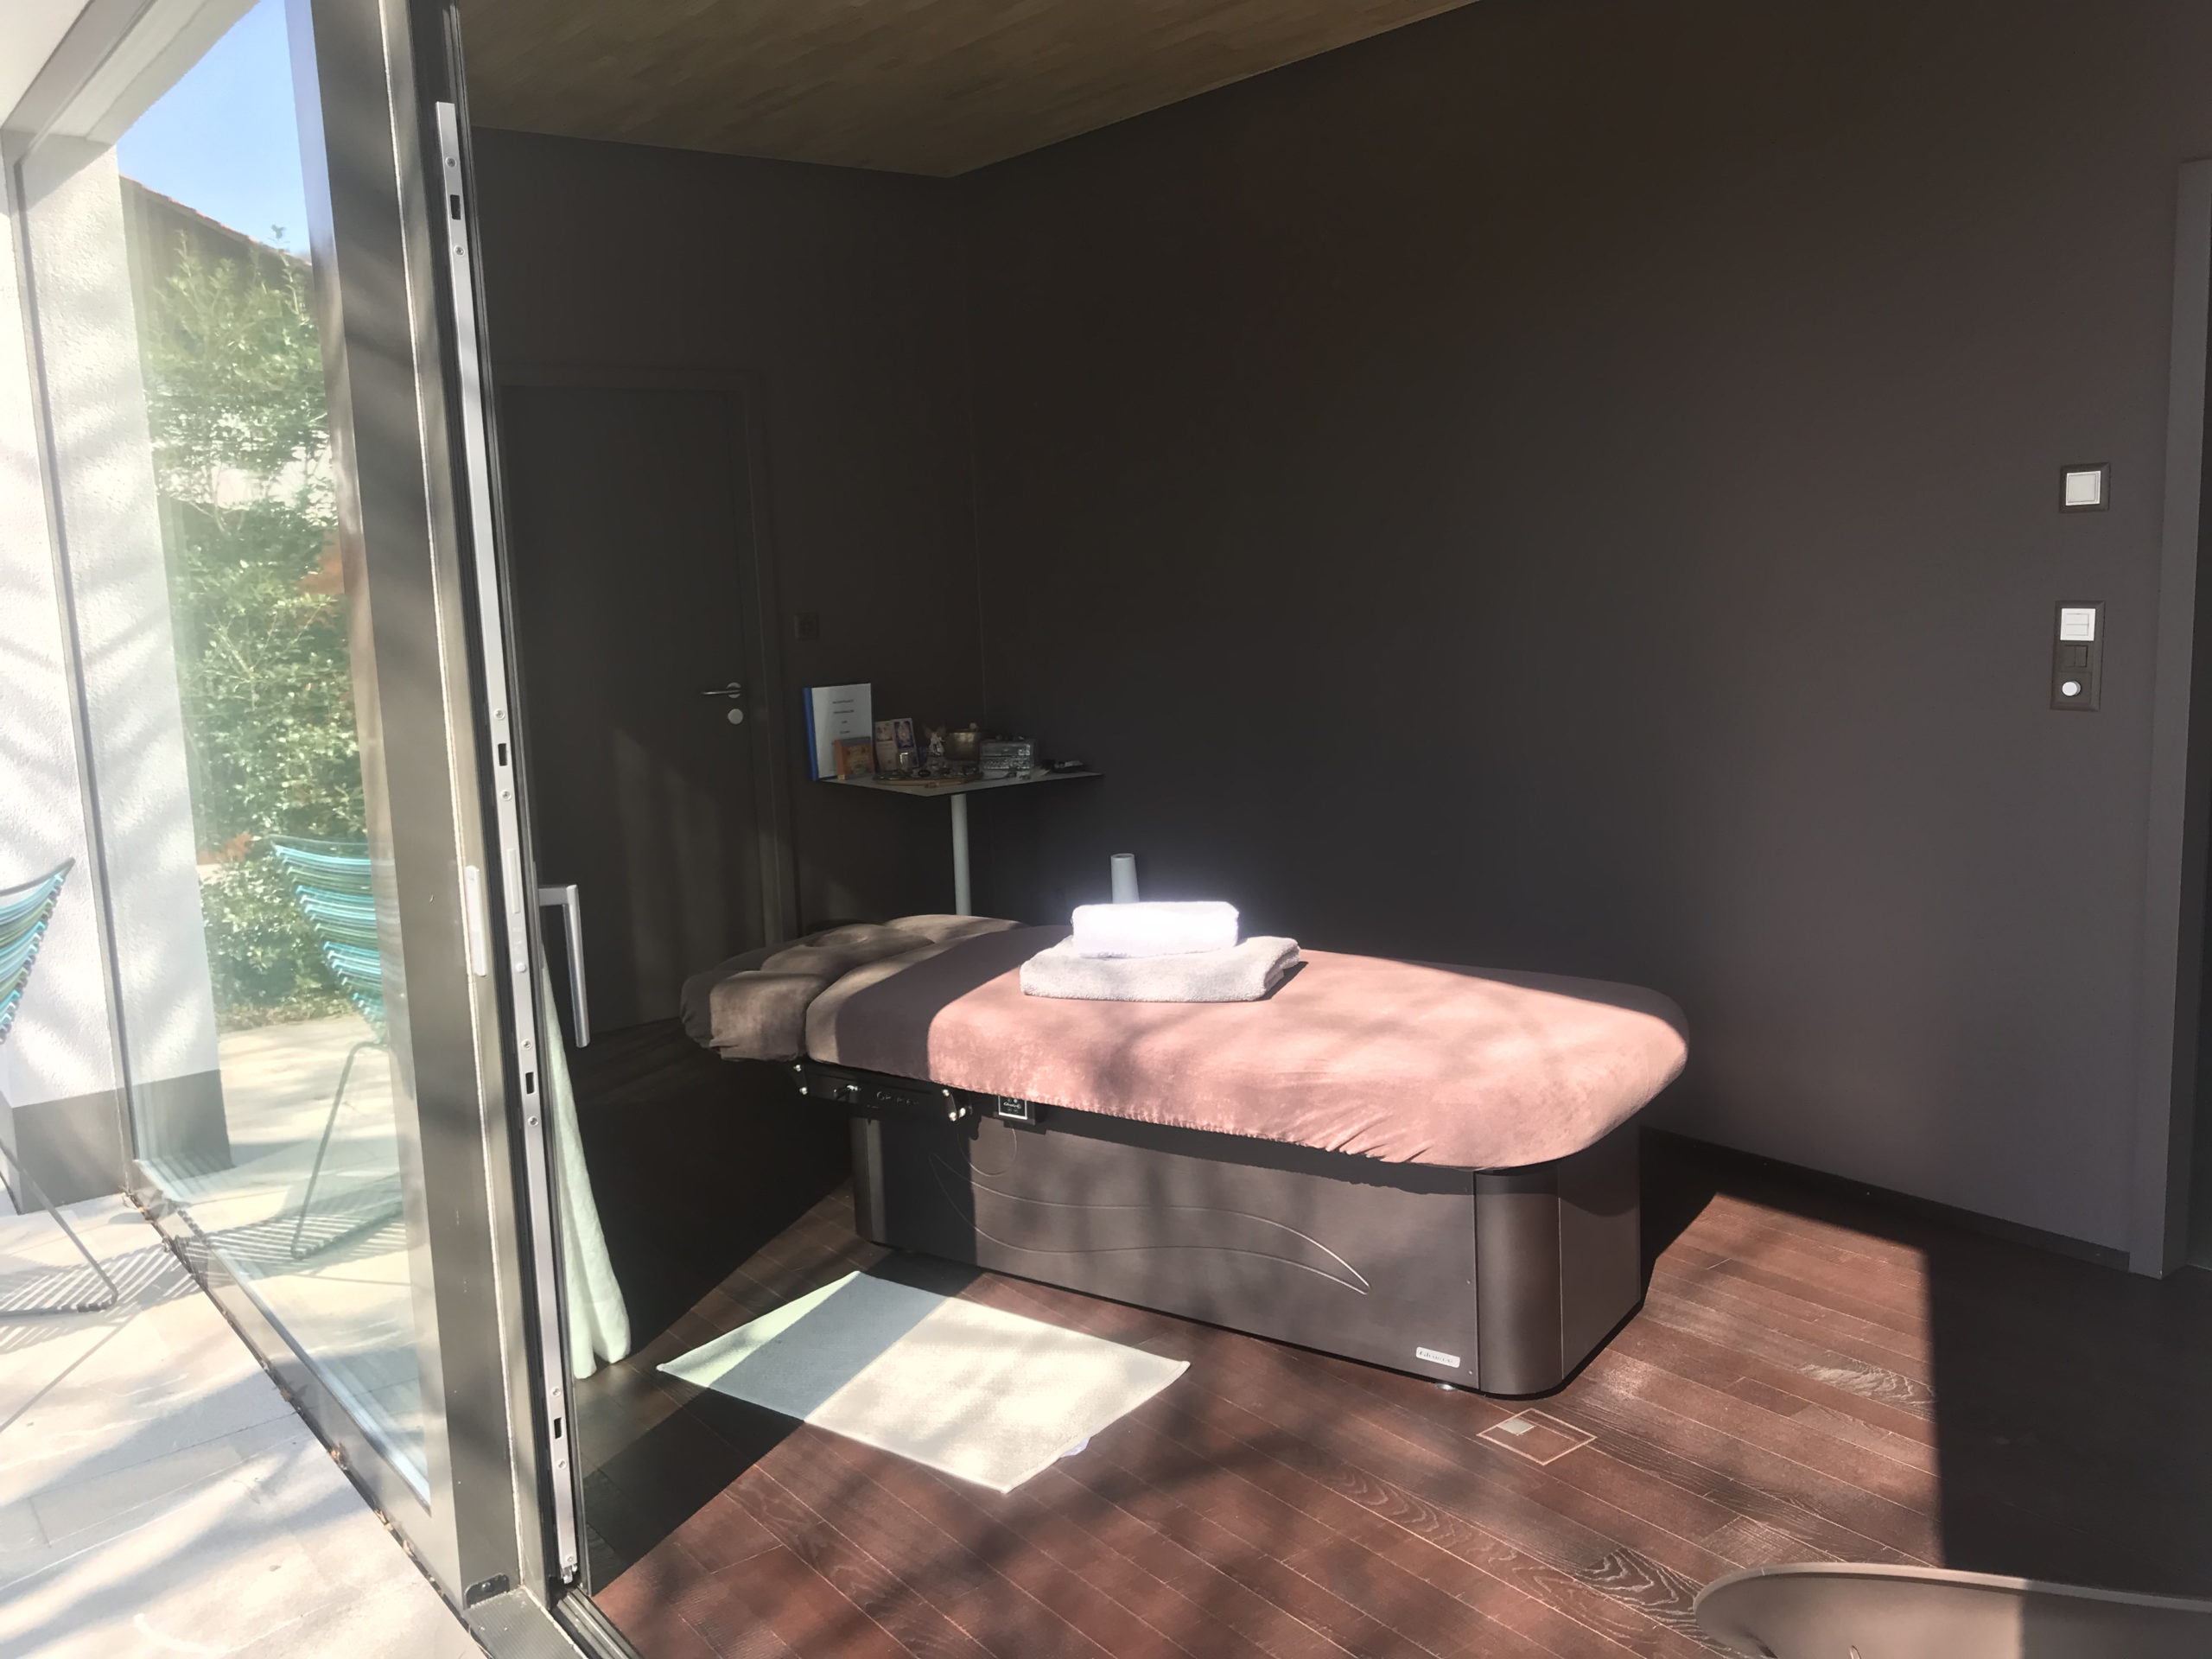 inspiration spa detente soins 38 scaled